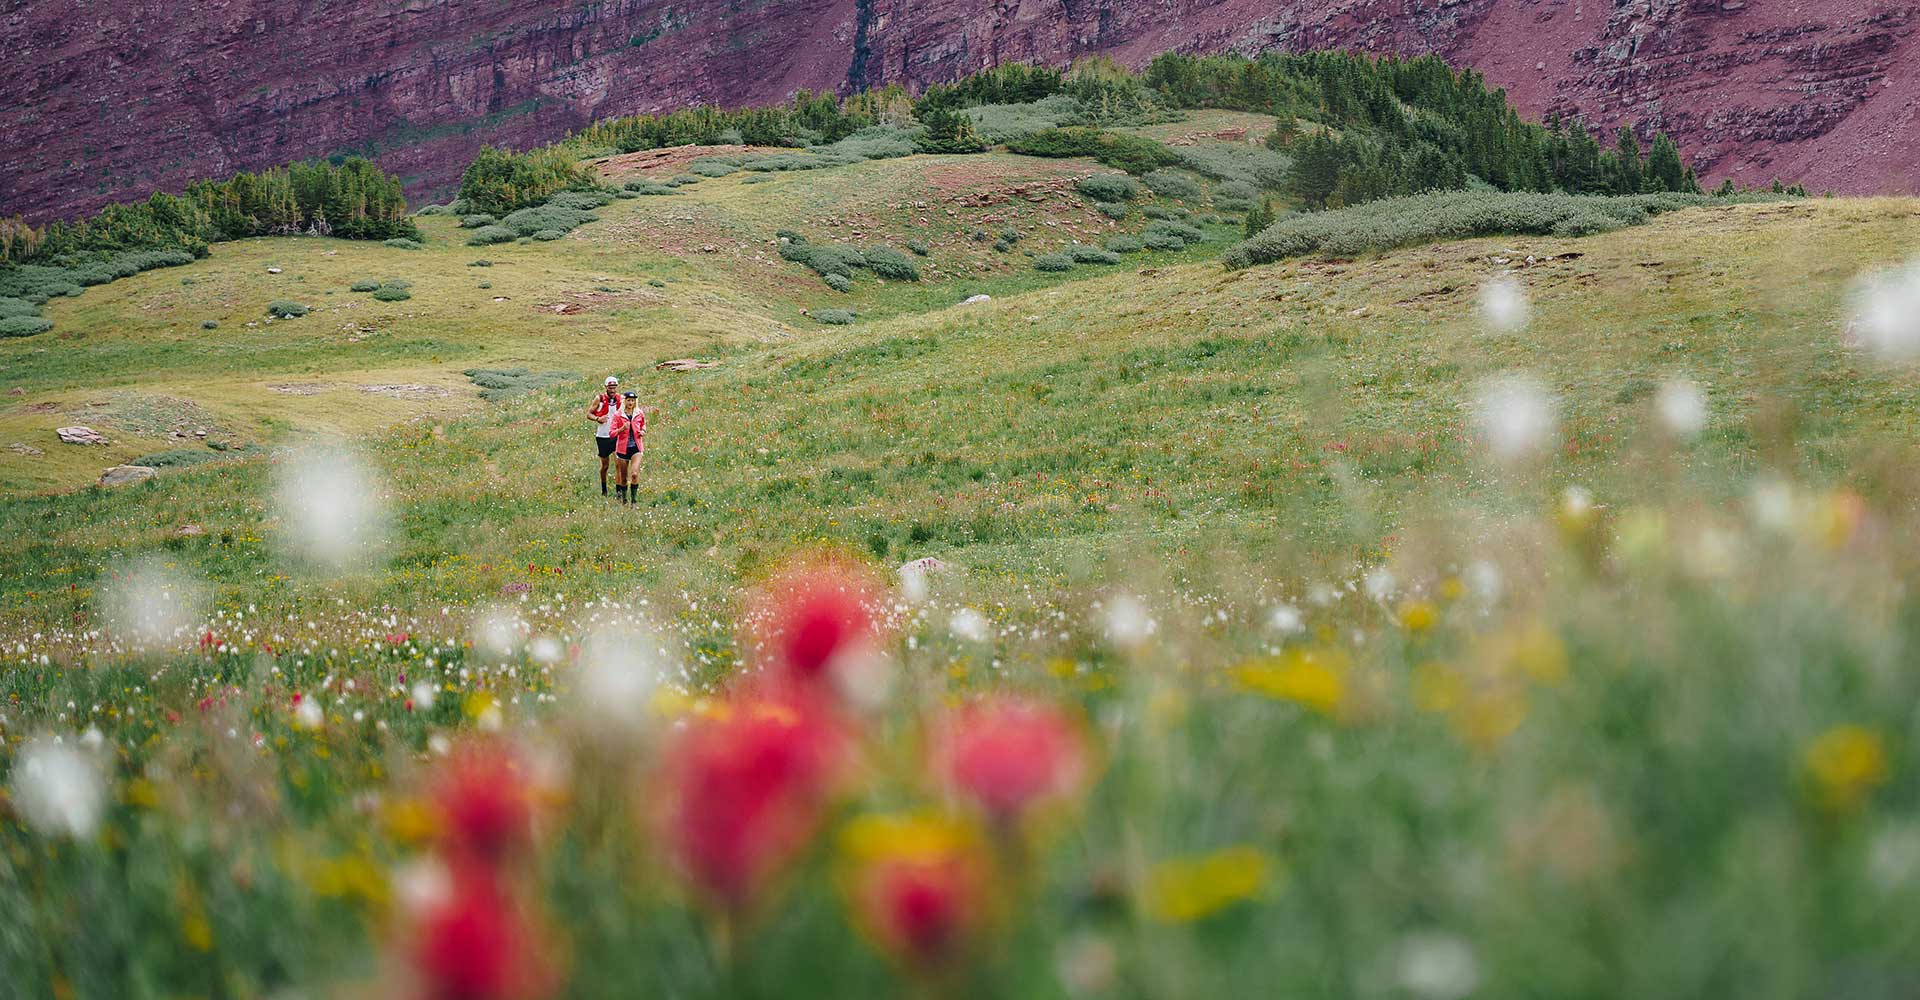 Flowers galore in the Maroon Bells-Snowmass Wilderness